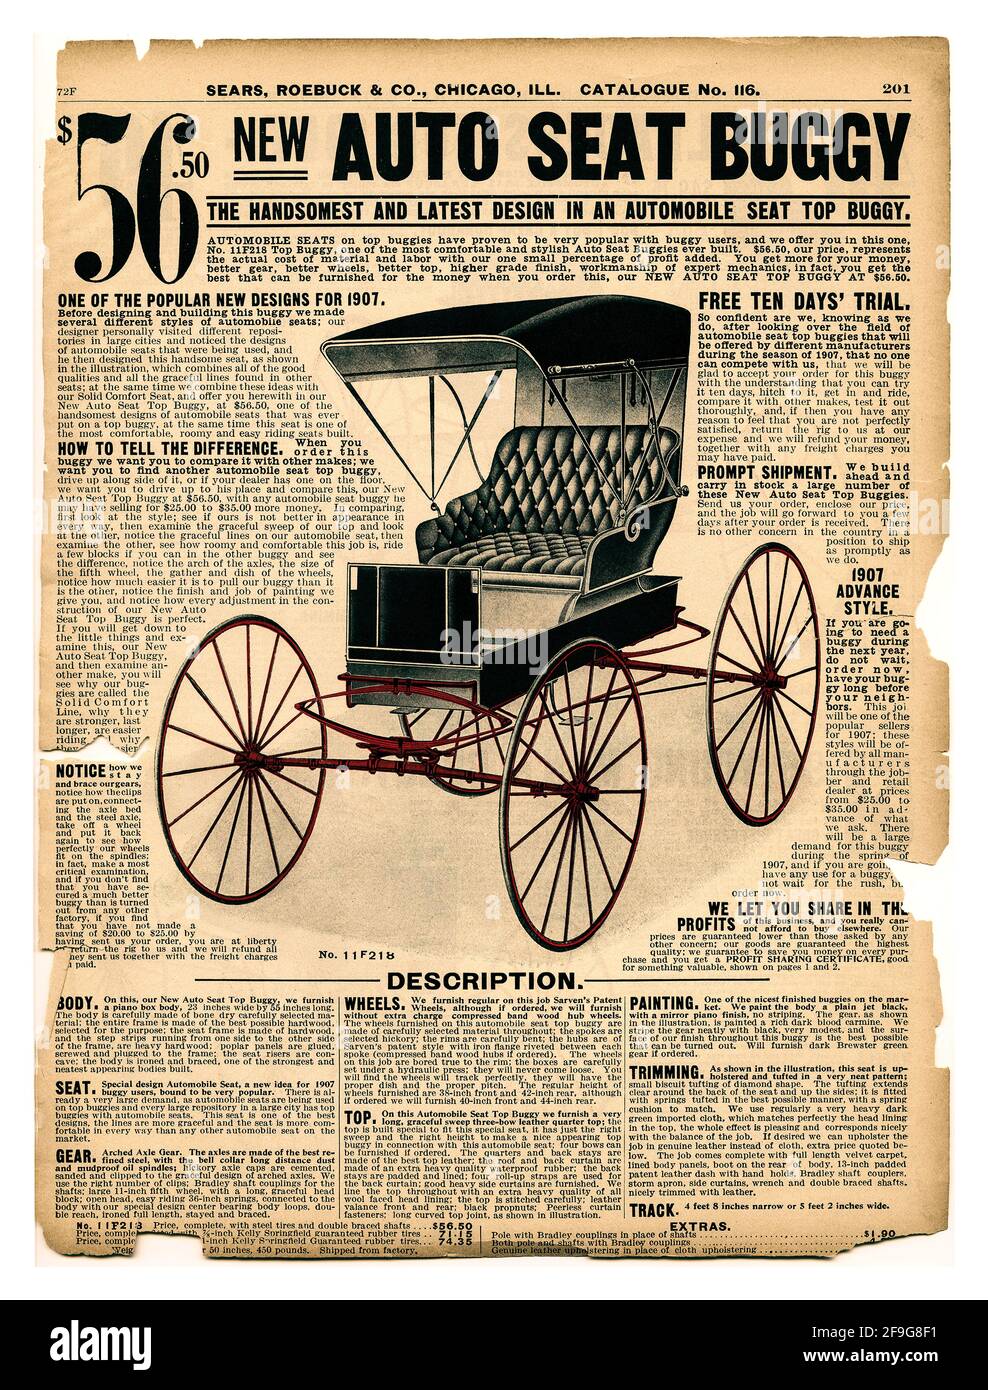 Vintage transport automobile seat top buggy 1907 Sears, Roebuck & Co. catalogue.  auto seat buggy. The advertisement includes: an illustration of the buggy, the price, $56.50  and a detailed description. The latest design in an automobile seat top buggy. Stock Photo